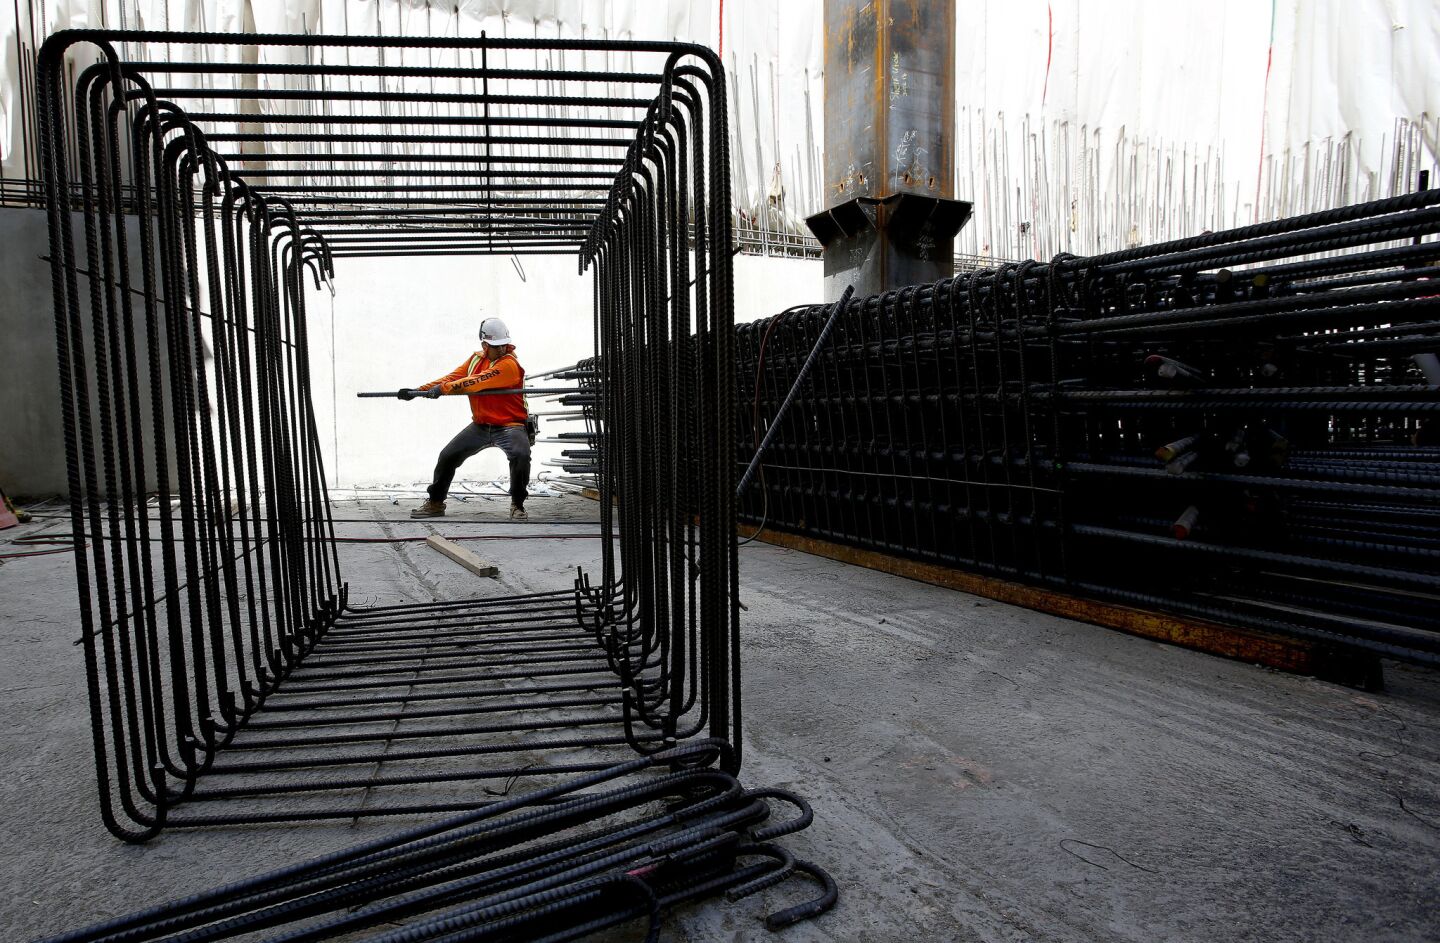 Ironworker Joel Ruvalcaba tightens up rebar during construction of the 73-story, 1,100-foot tall Wilshire Grand tower in downtown Los Angeles.